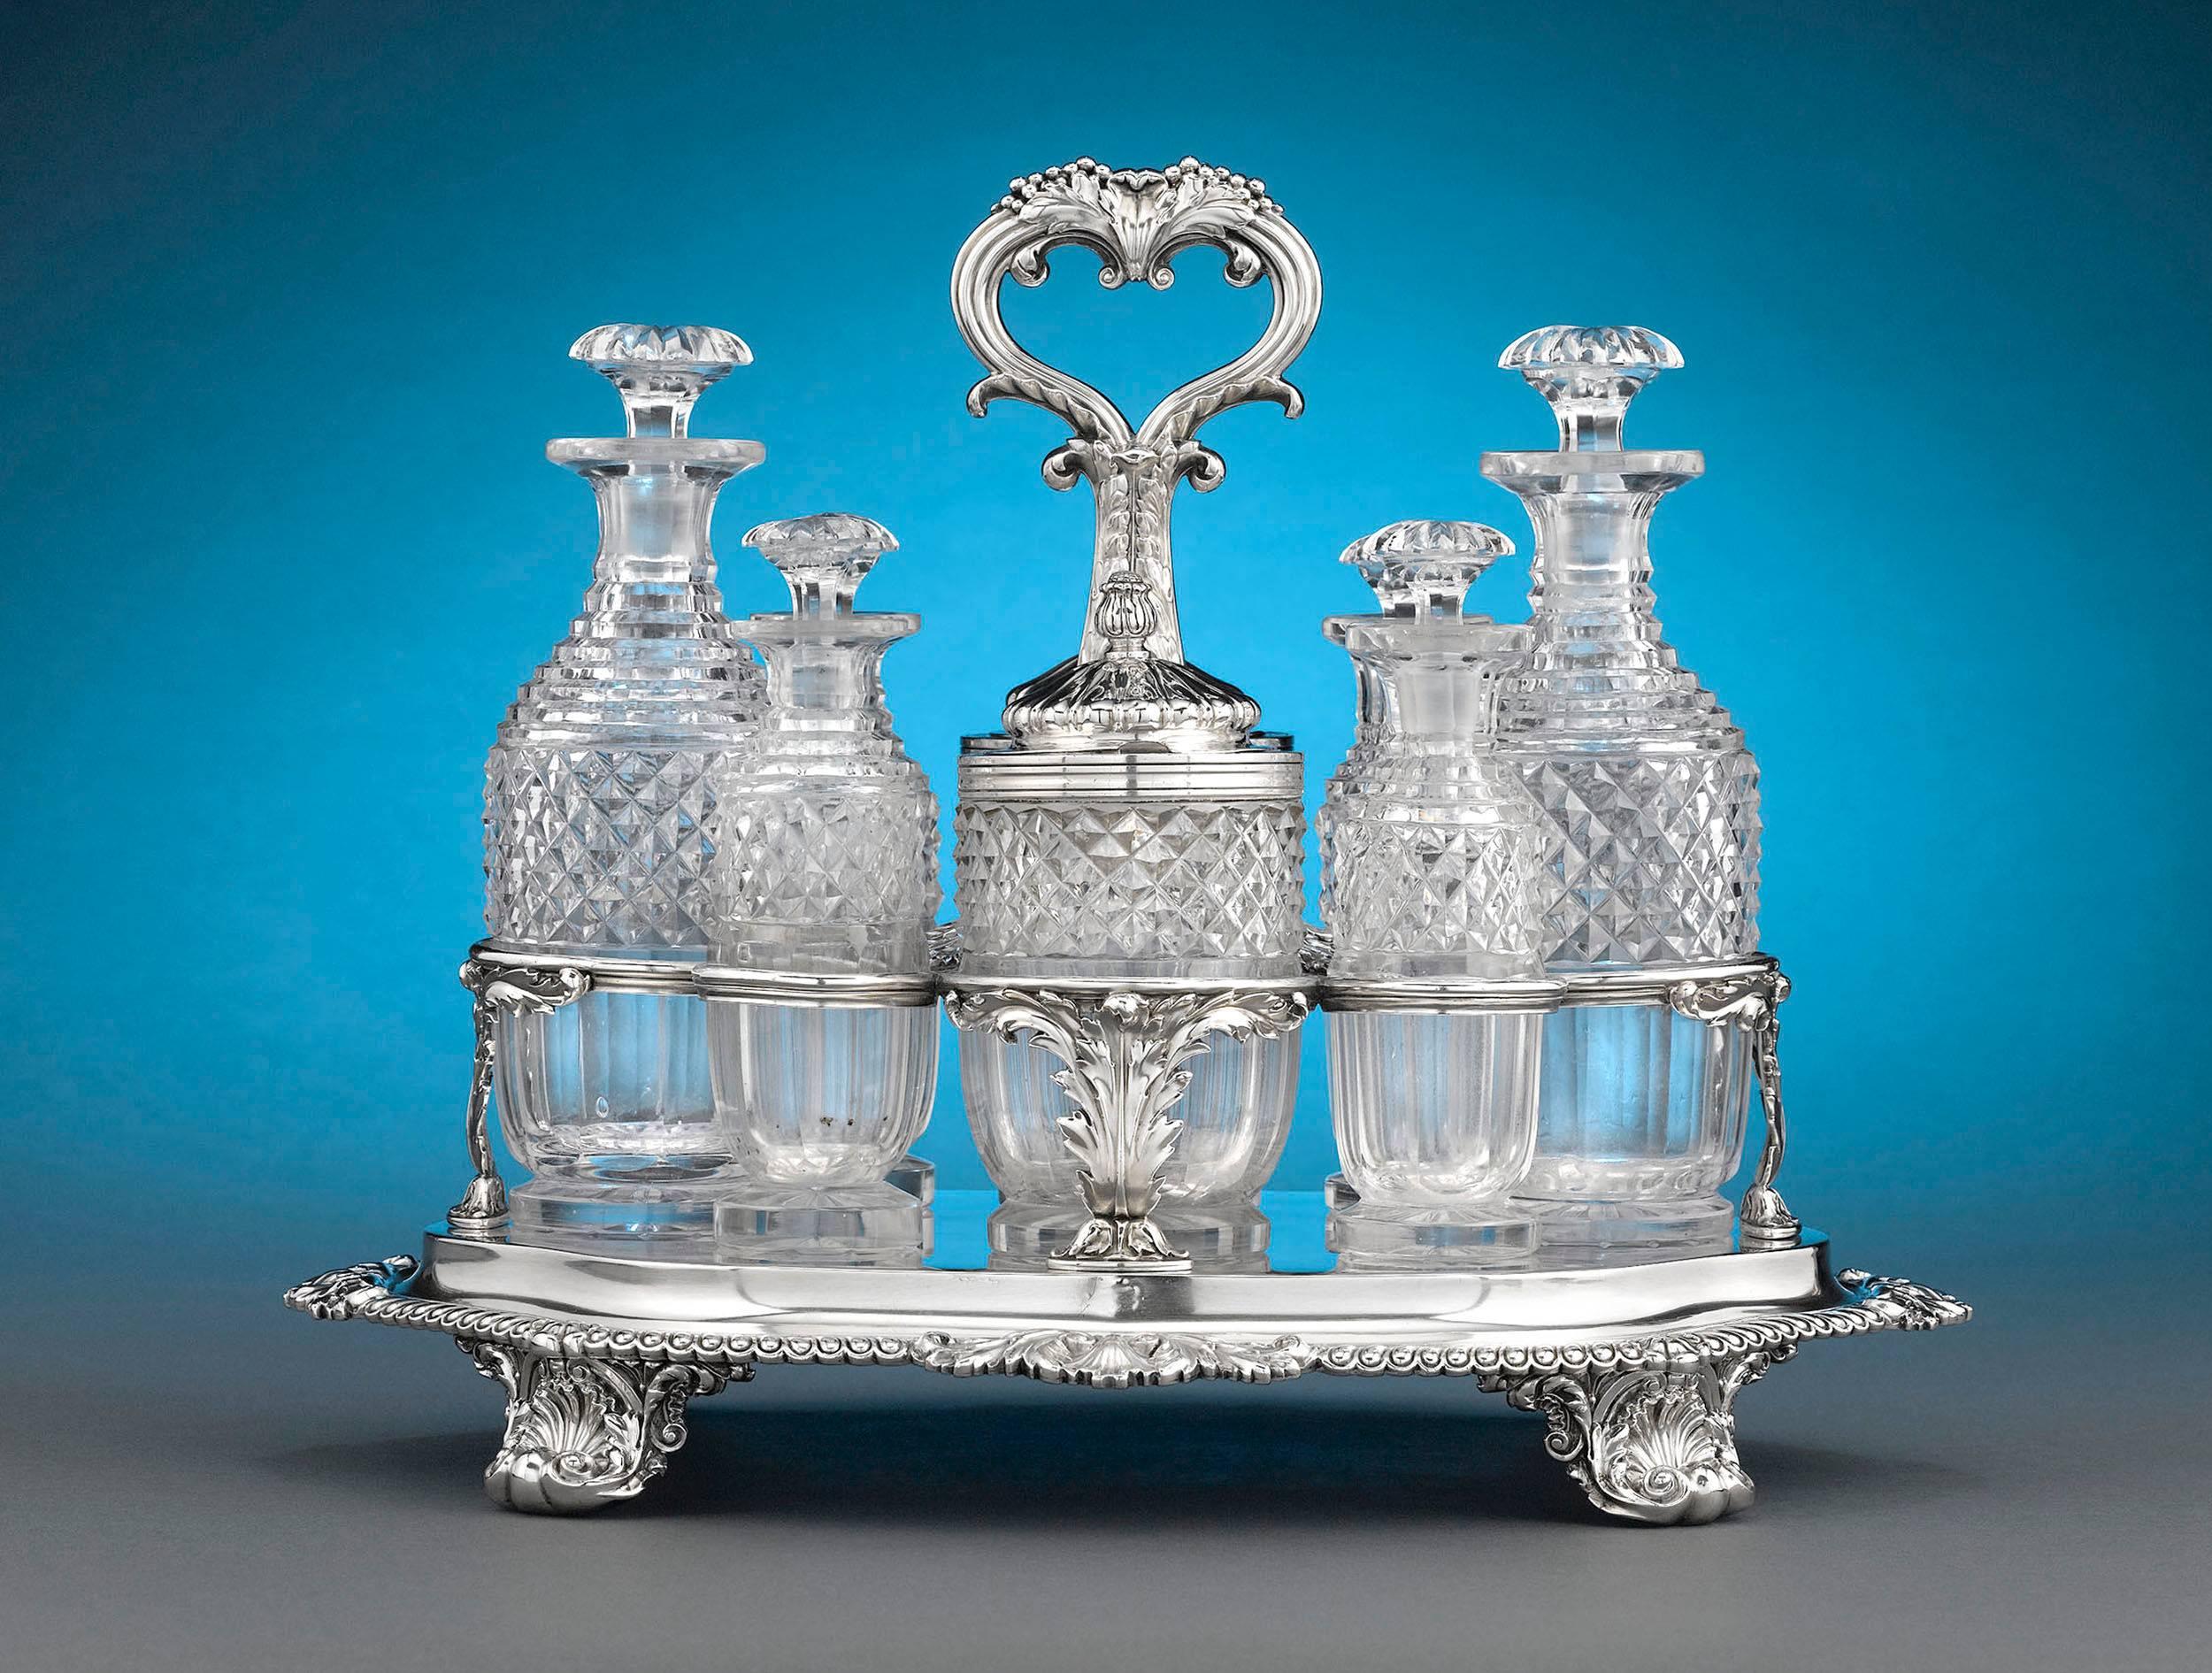 This important nine-piece Georgian silver and cut-glass cruet set by Paul Storr is an excellent example of the silversmith's remarkable Georgian work. The set consists of eight cut-glass bottles: two carafes for oil and vinegar, two mustard pots